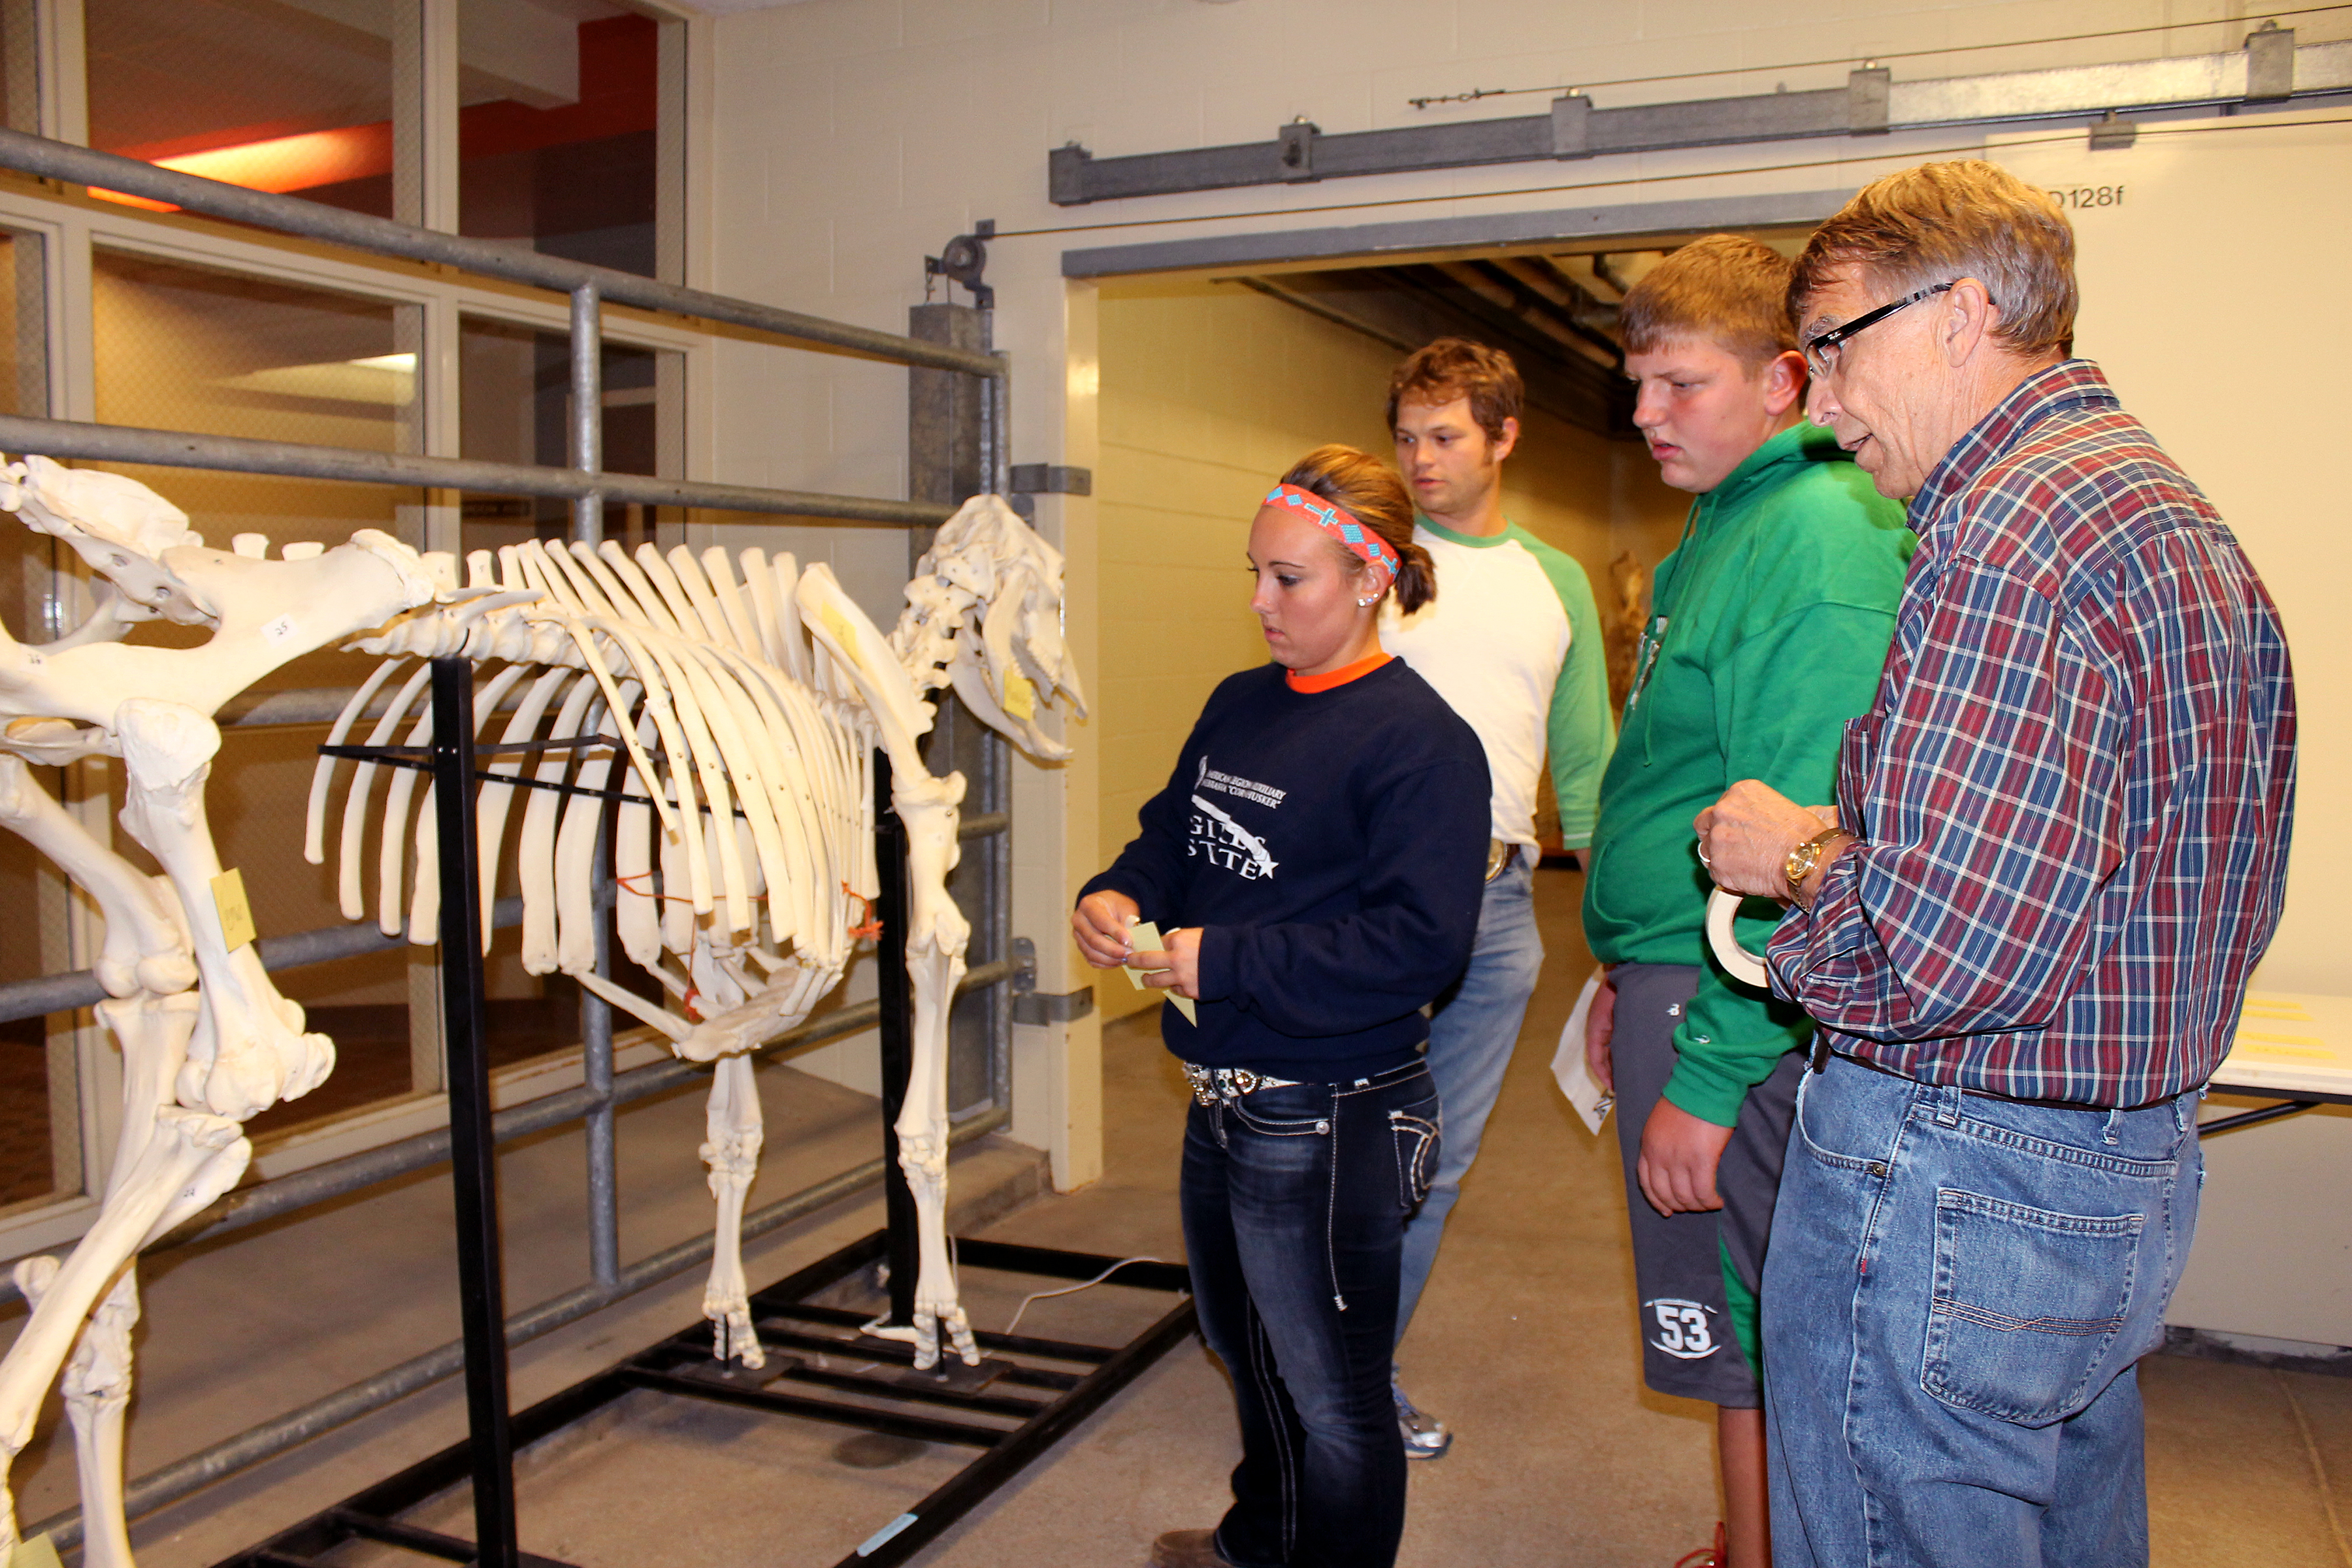 Department of Animal Science Professor Dennis Brink (right) interacts with some students from various schools at our annual an annual Open House at the University of Nebraska-Lincoln animal science complex.